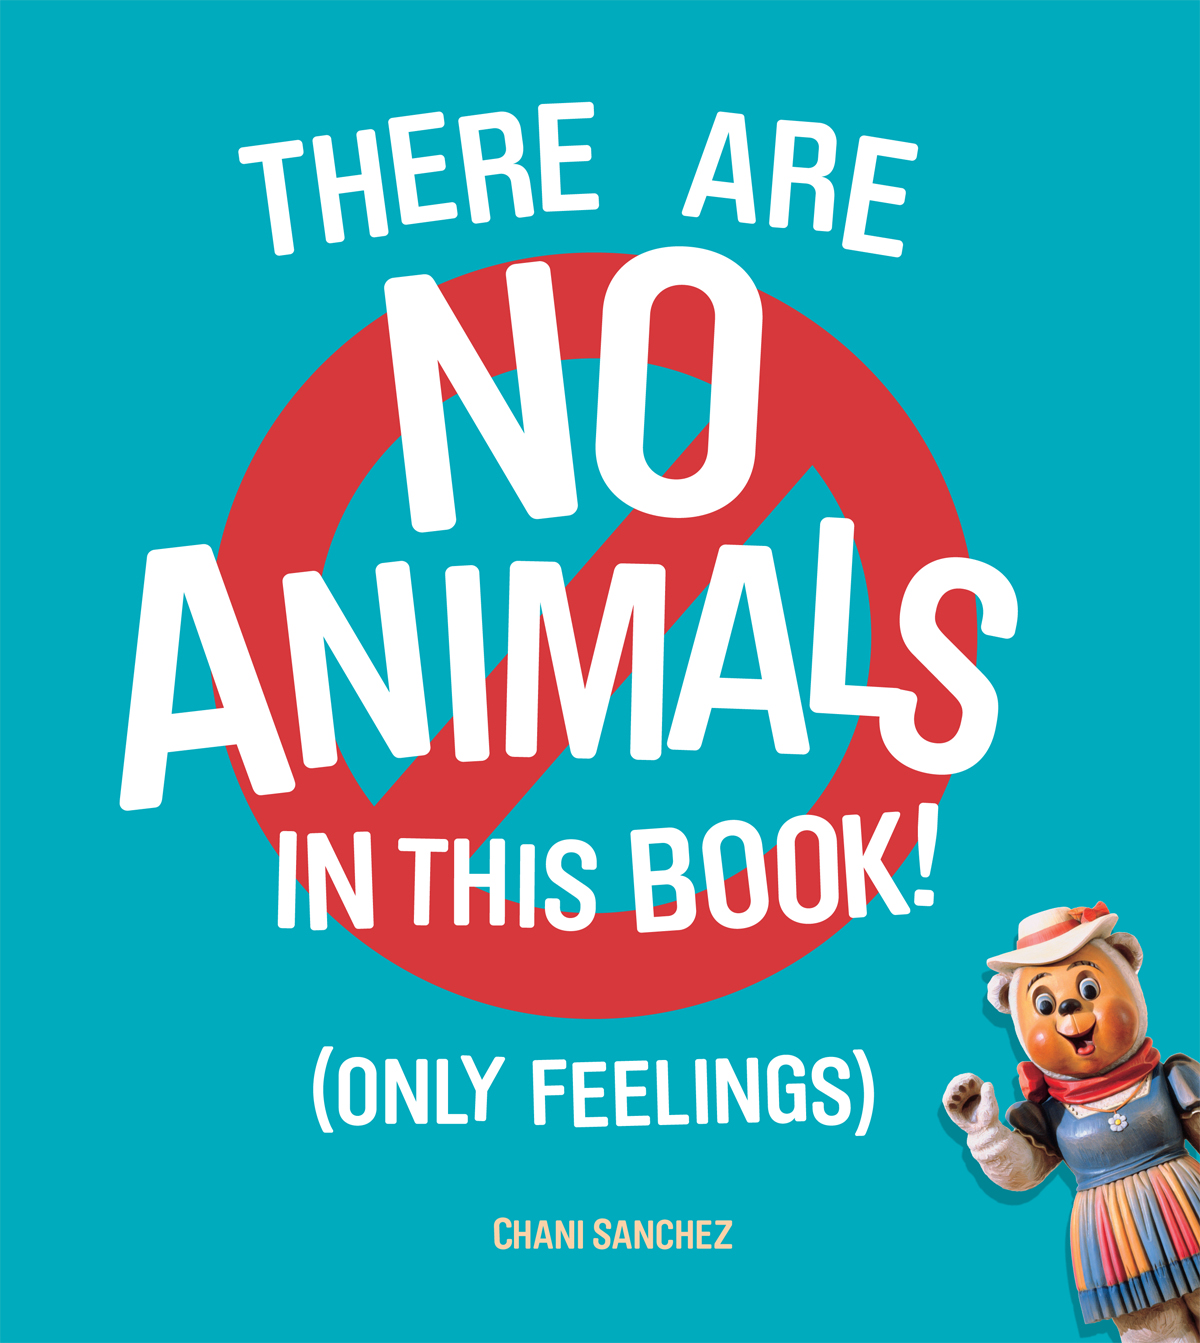 Book Launch: There Are NO Animals in this Book! (Only Feelings) by Chani Sanchez